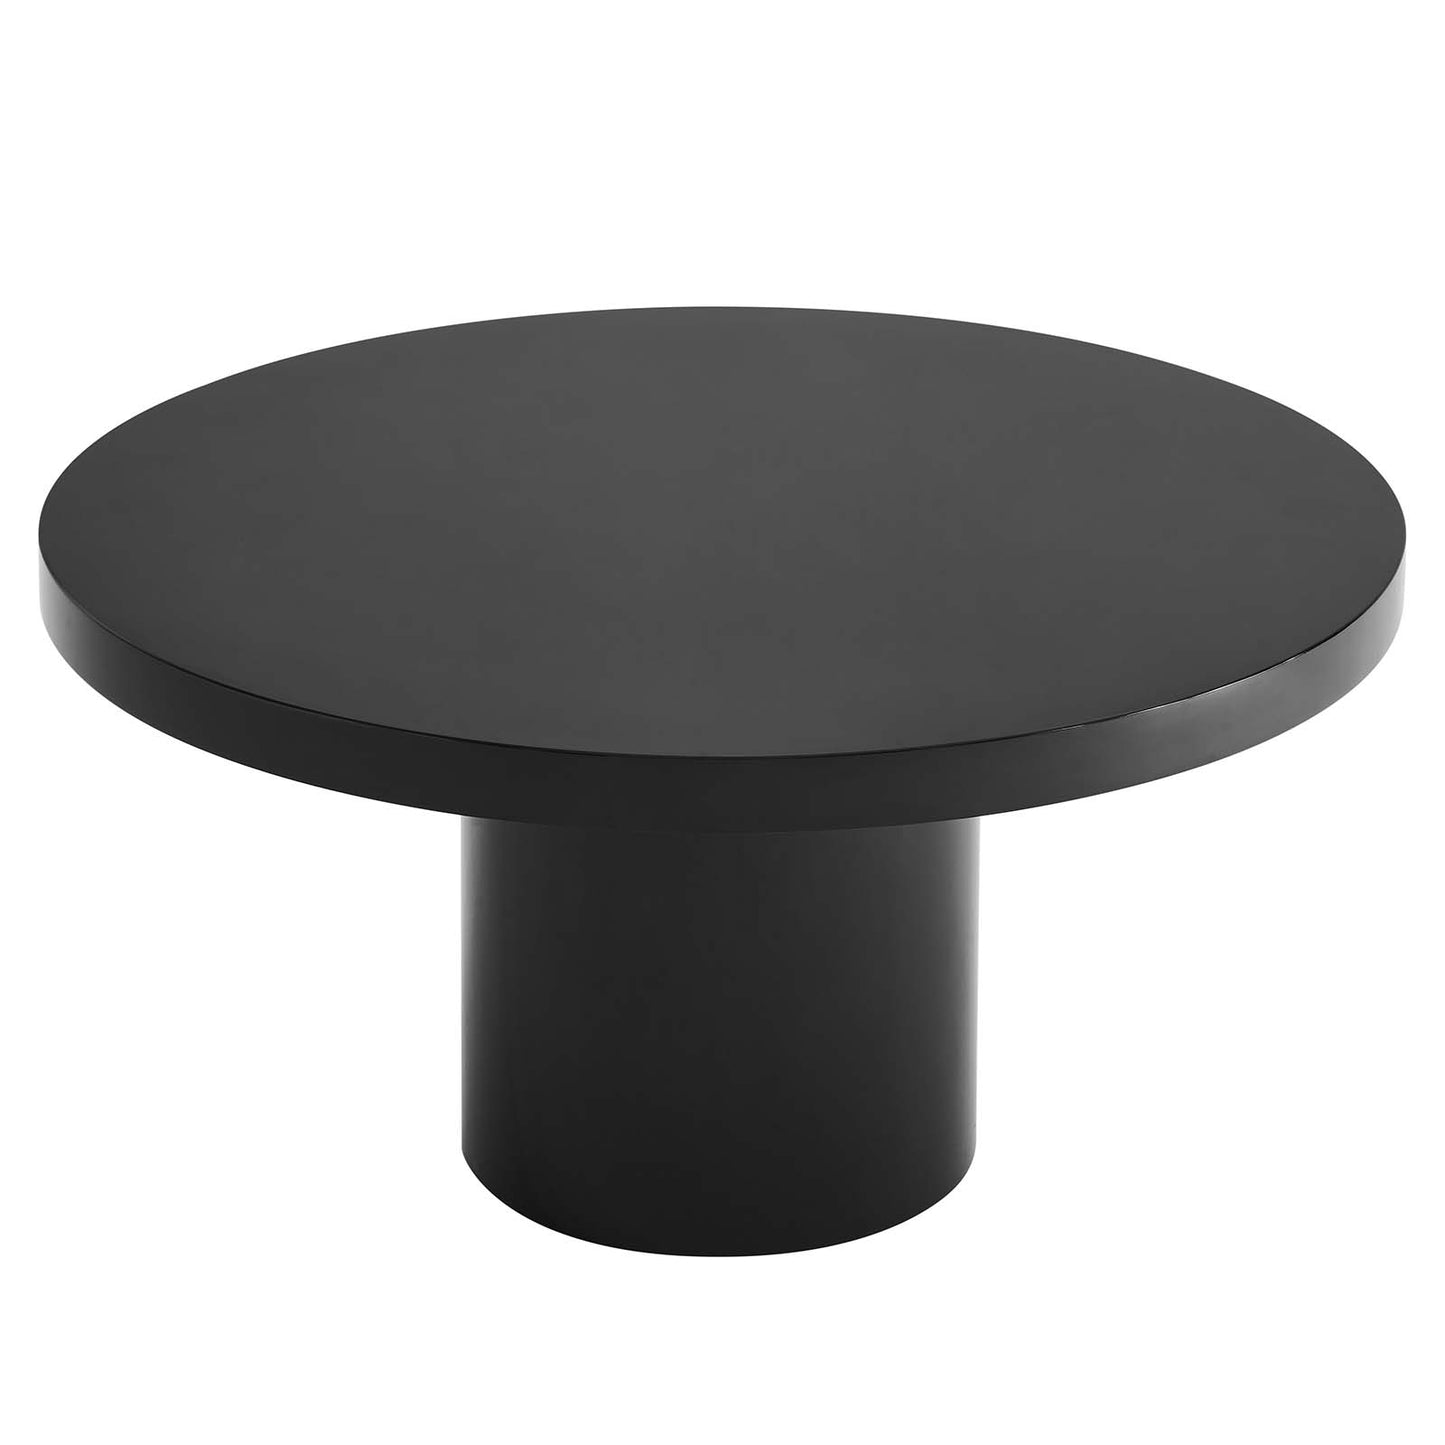 Gratify 60" Round Dining Table Black EEI-4910-BLK